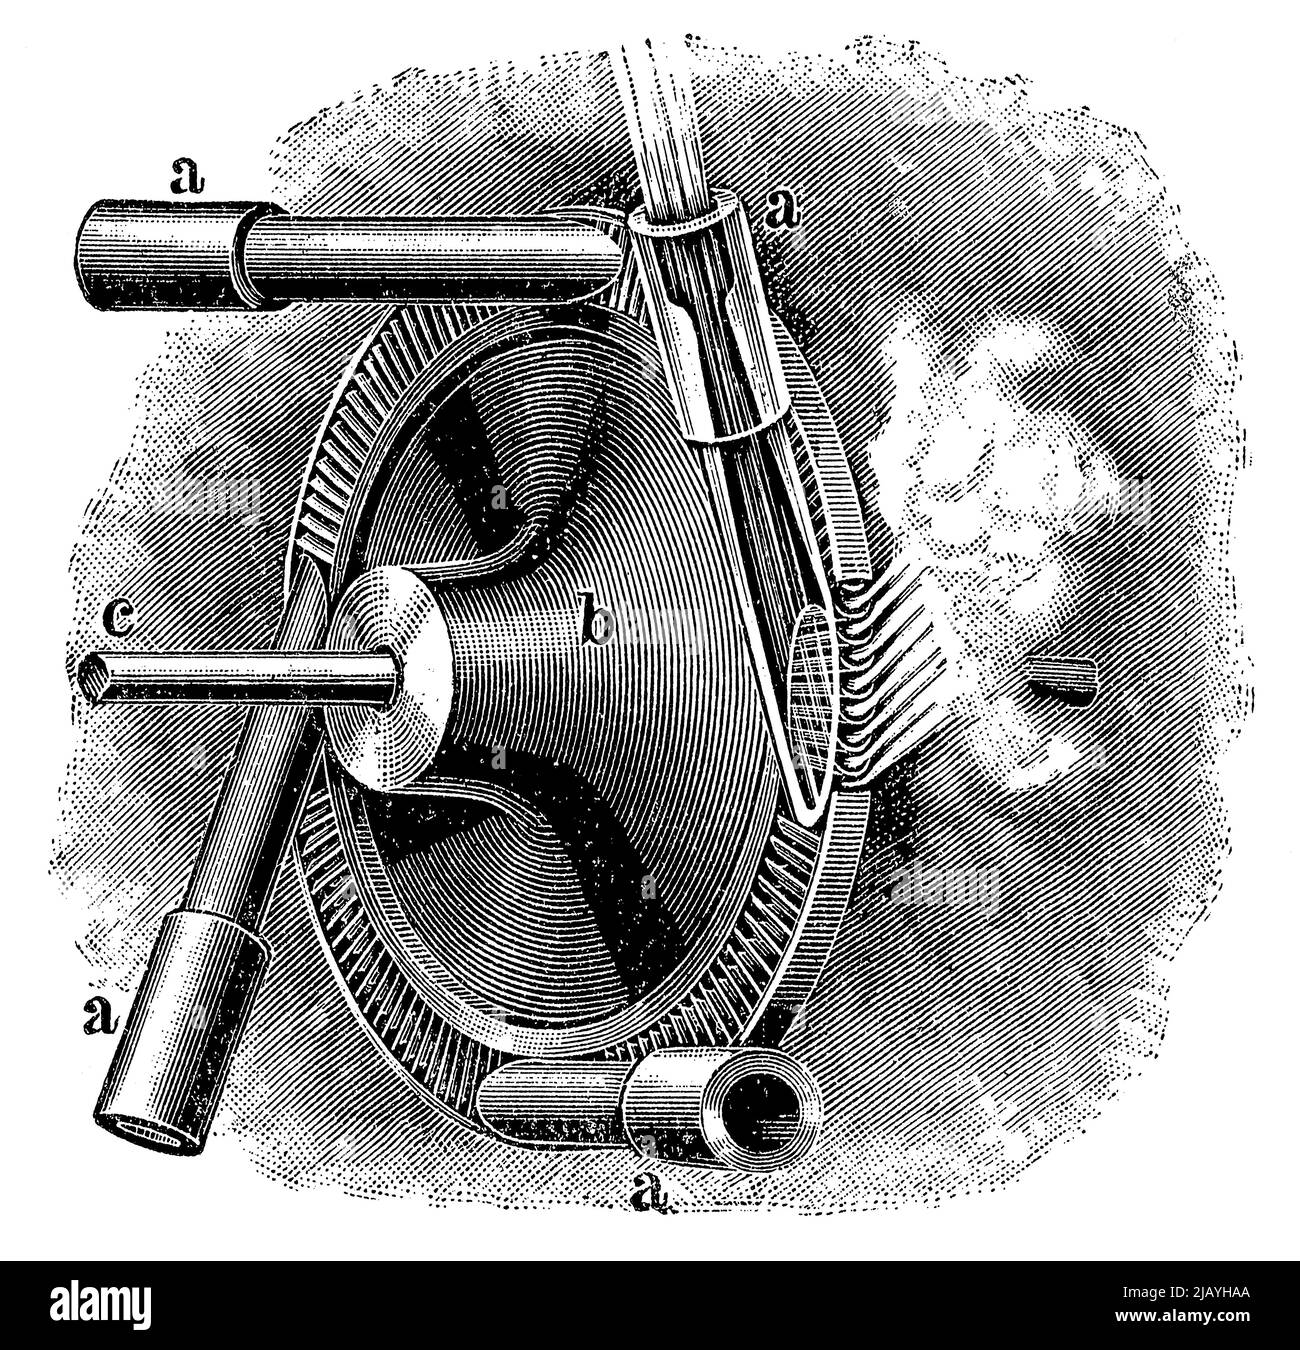 Impeller and nozzles of a de Laval steam turbine. Publication of the book 'Meyers Konversations-Lexikon', Volume 2, Leipzig, Germany, 1910 Stock Photo